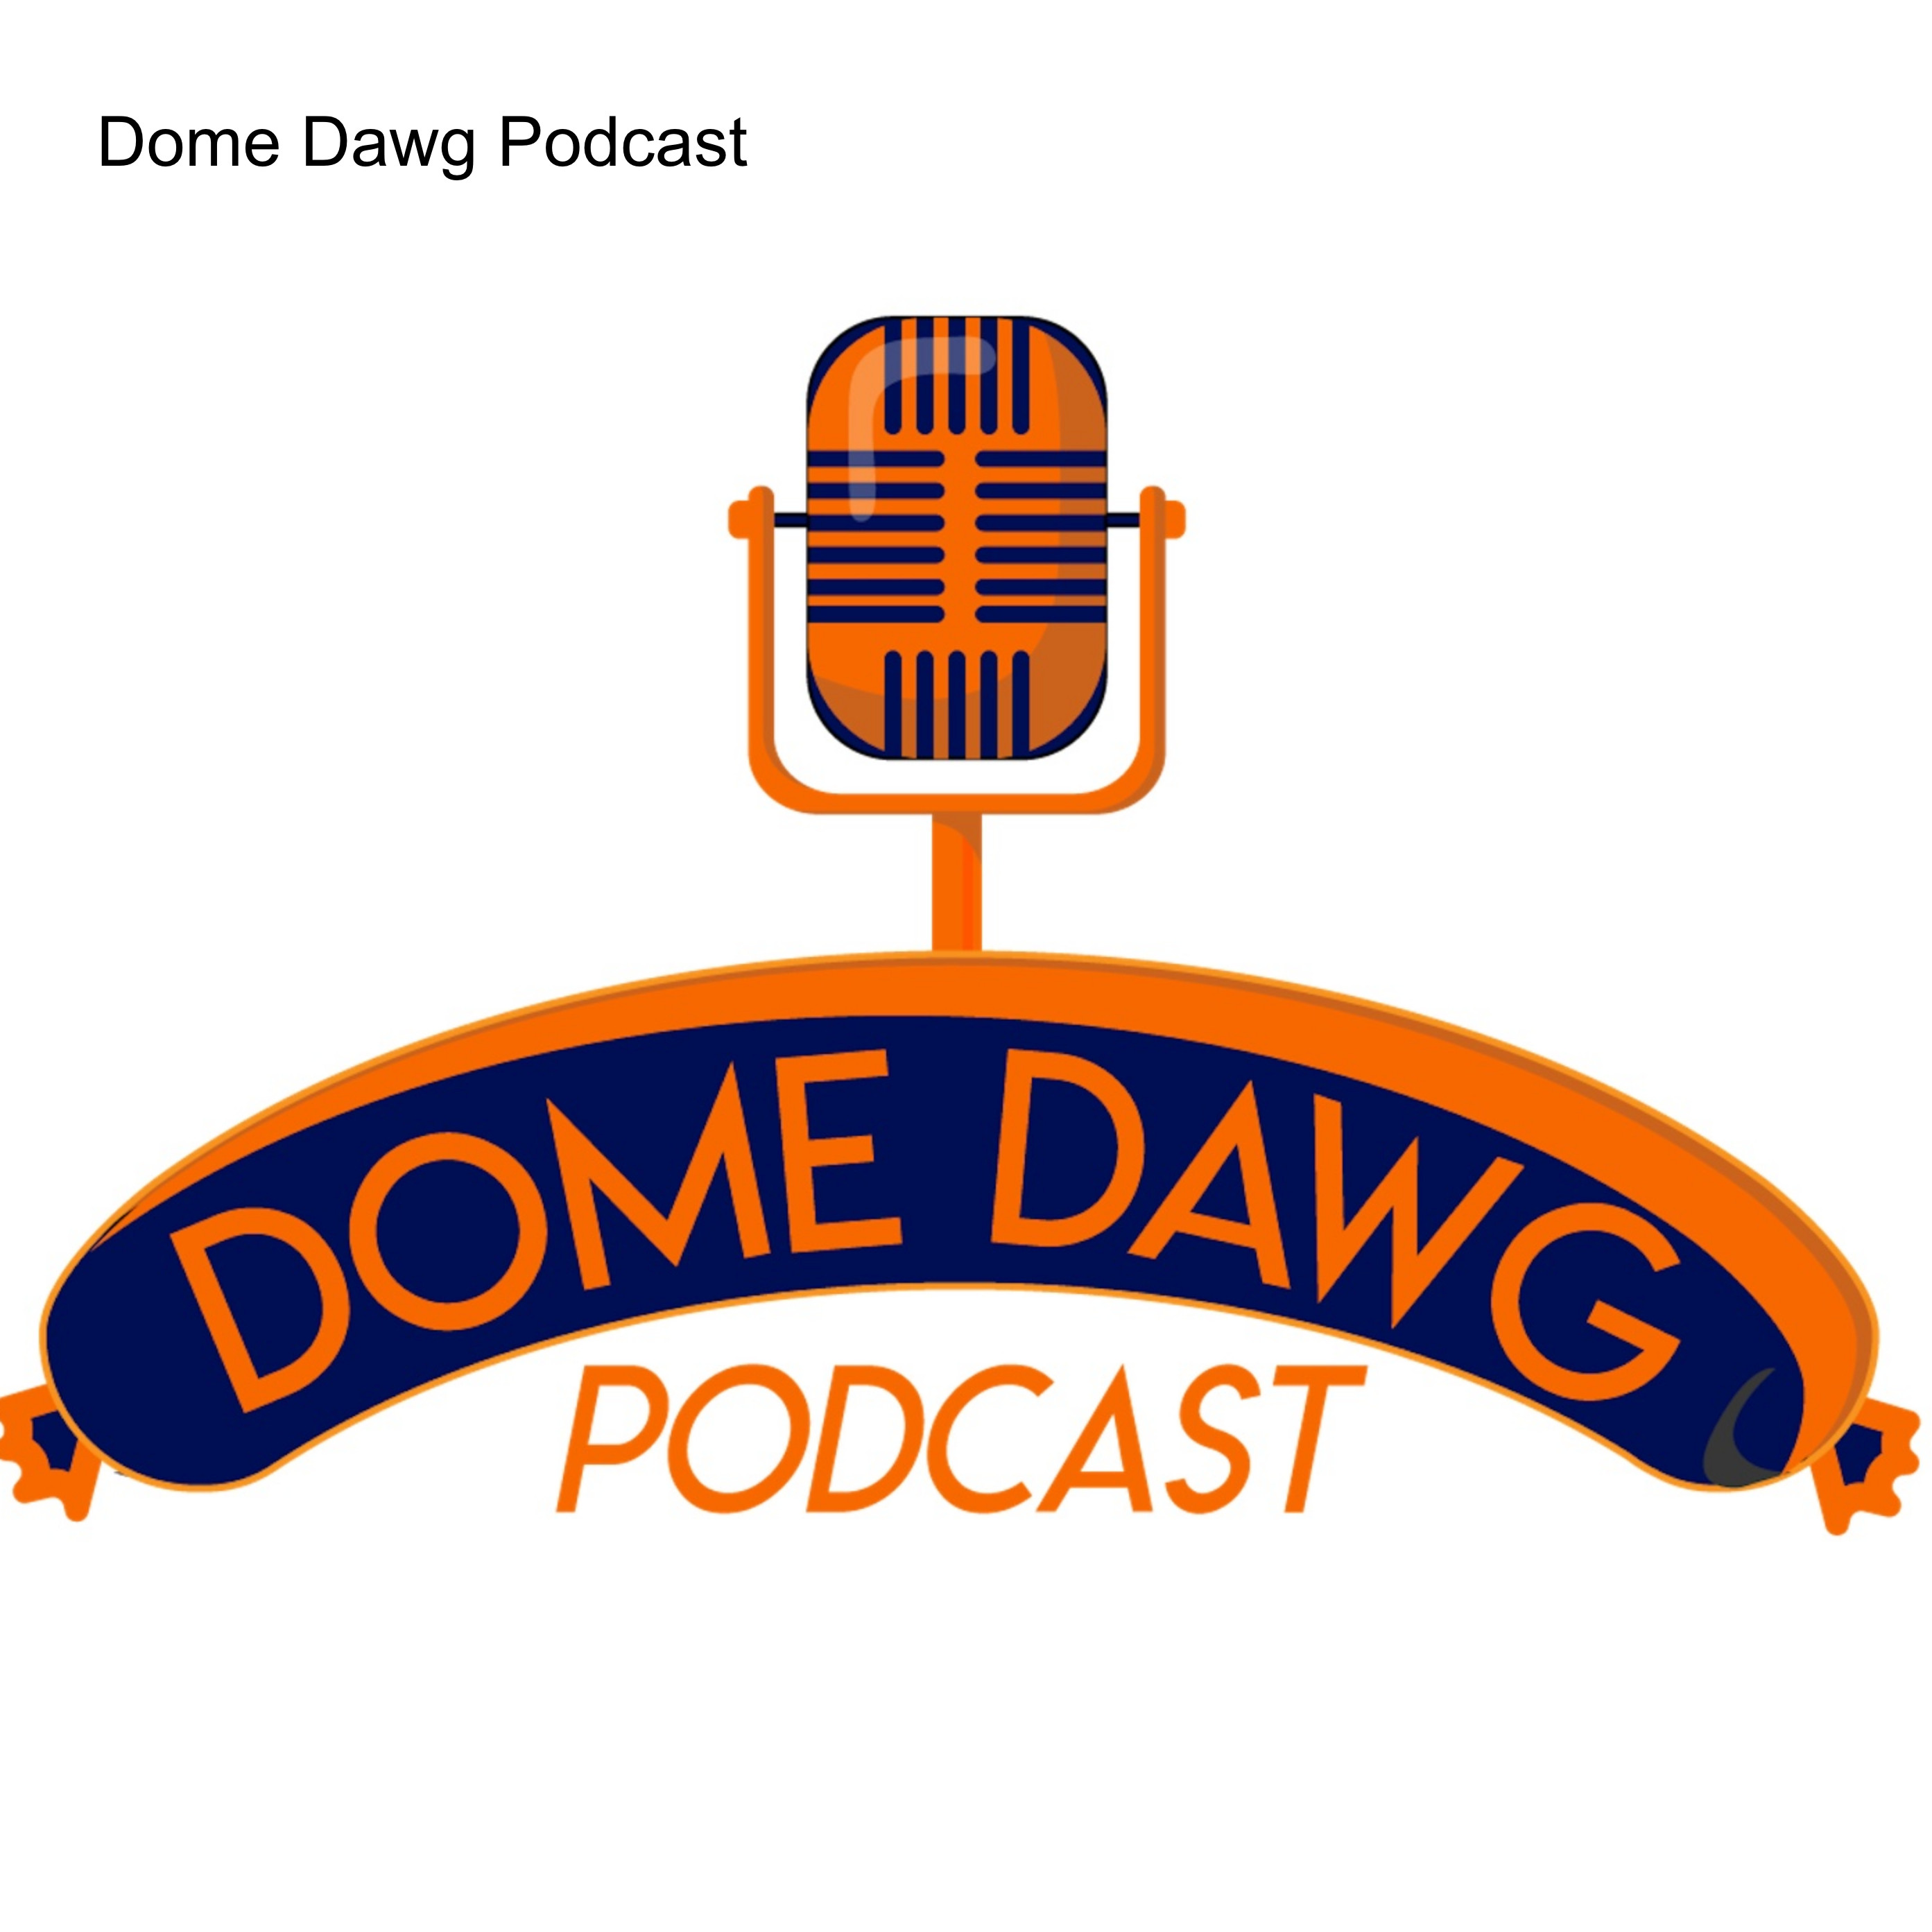 Dome Dawg Podcast